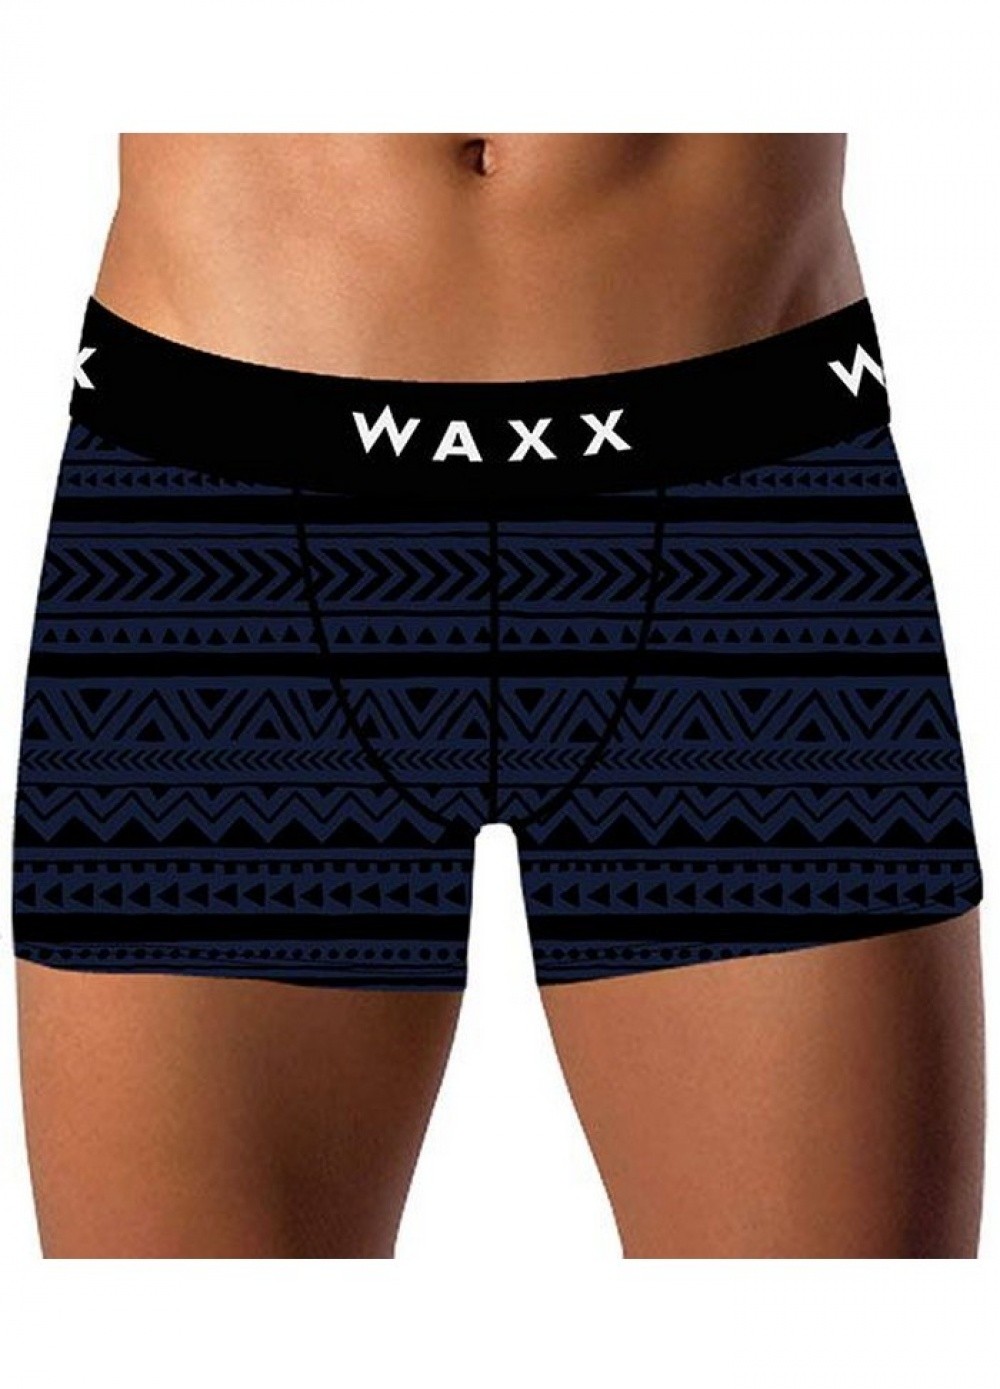 Boxer homme Waxx Ethny